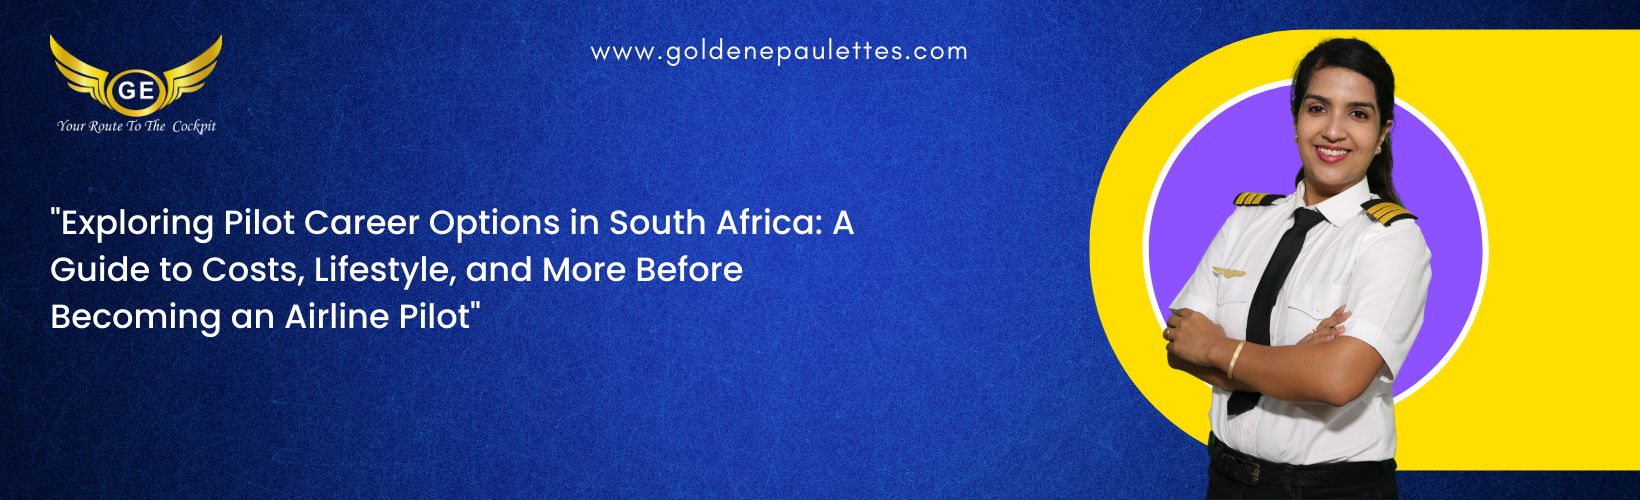 What to Consider Before Becoming an Airline Pilot in South Africa